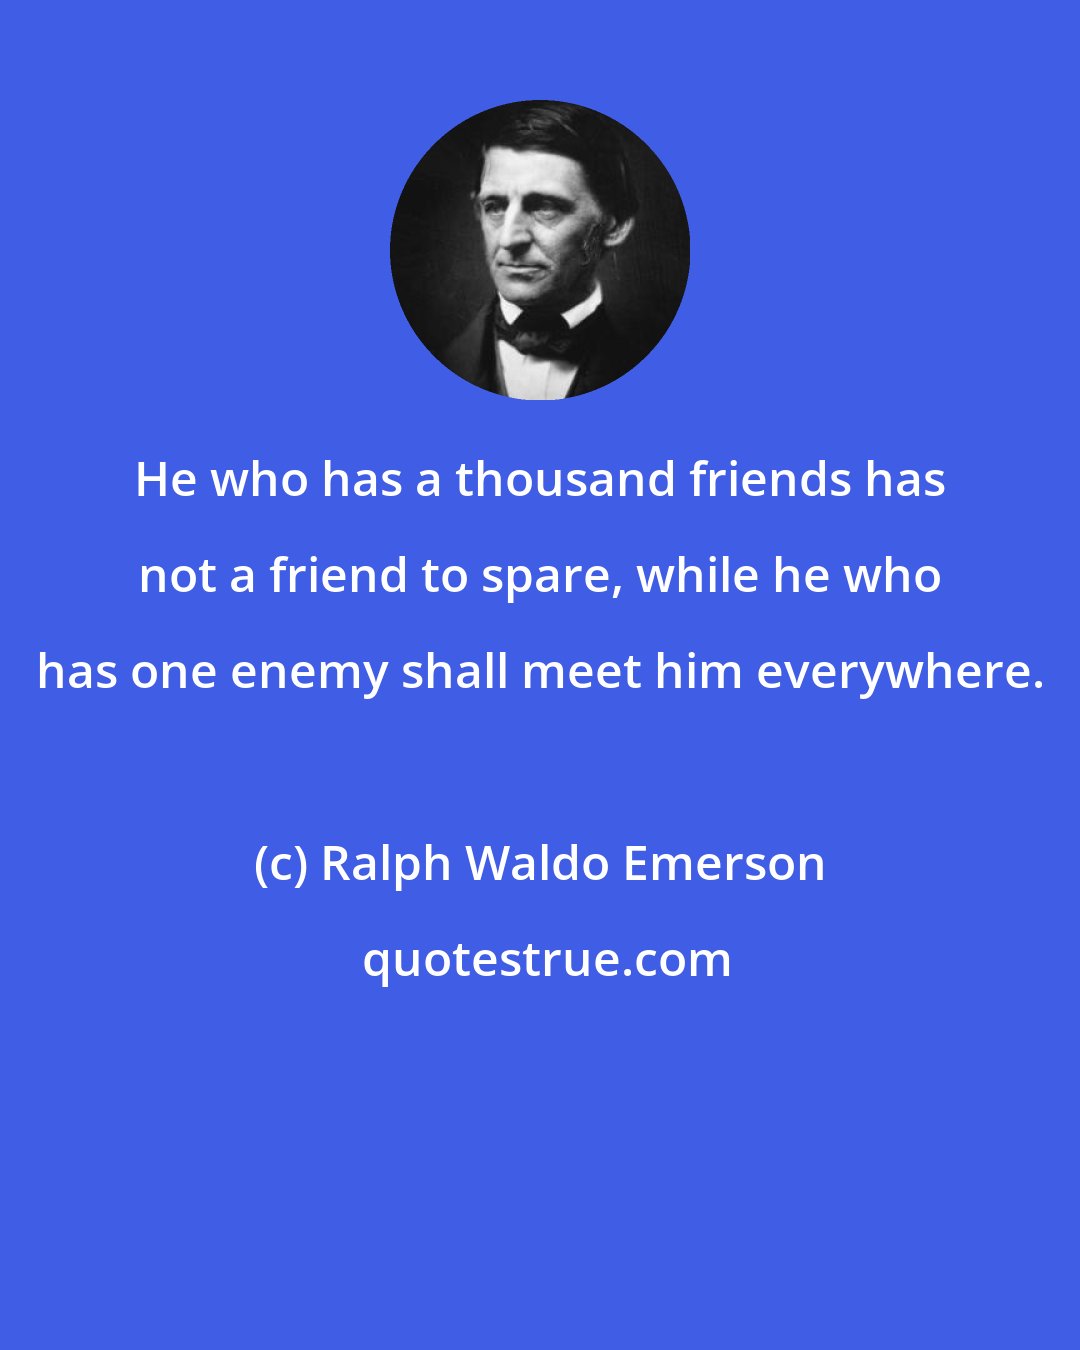 Ralph Waldo Emerson: He who has a thousand friends has not a friend to spare, while he who has one enemy shall meet him everywhere.